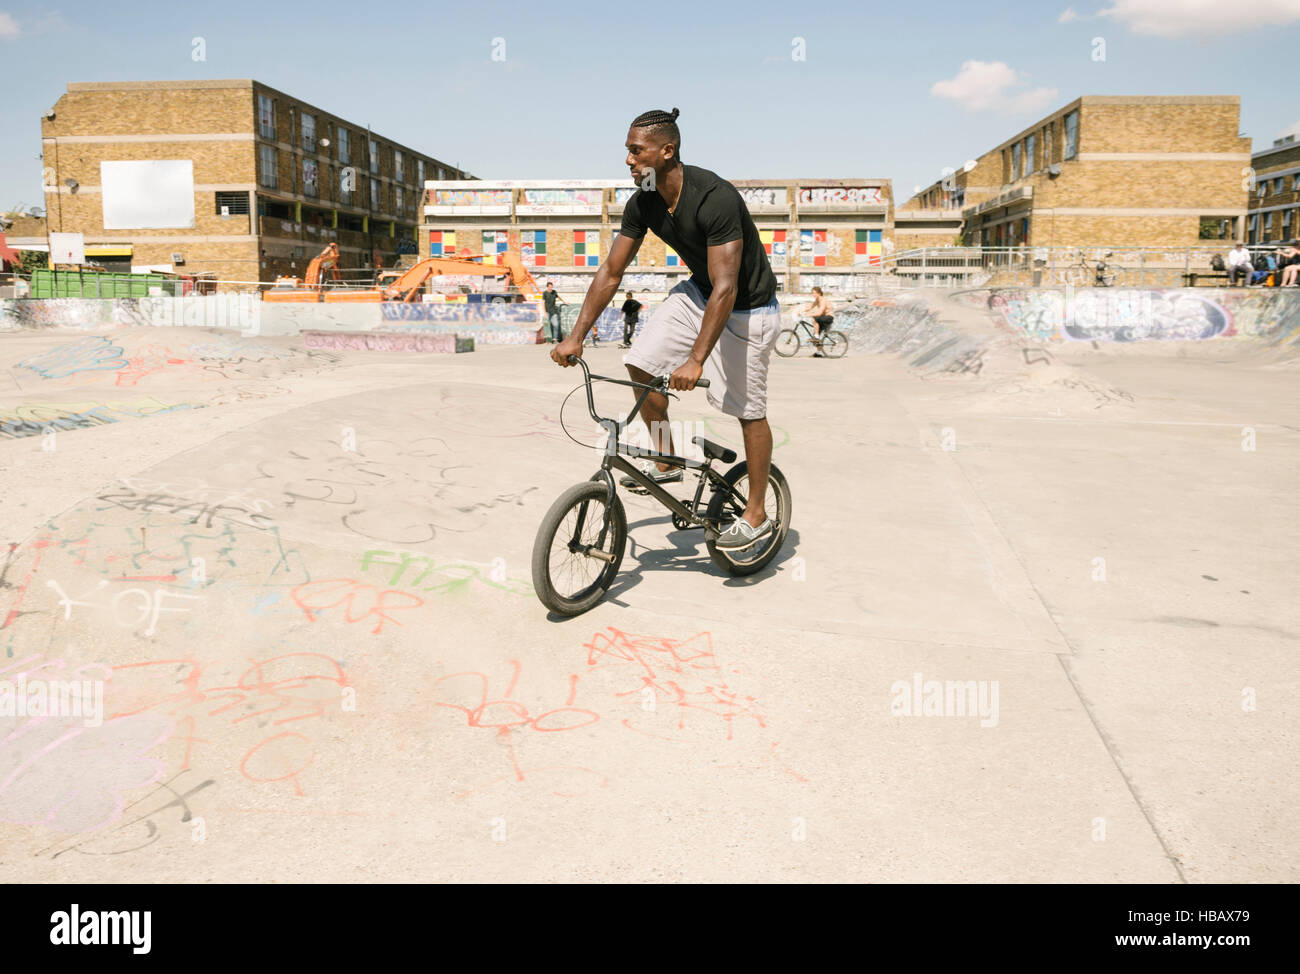 Young man riding BMX bicycle in skatepark Stock Photo